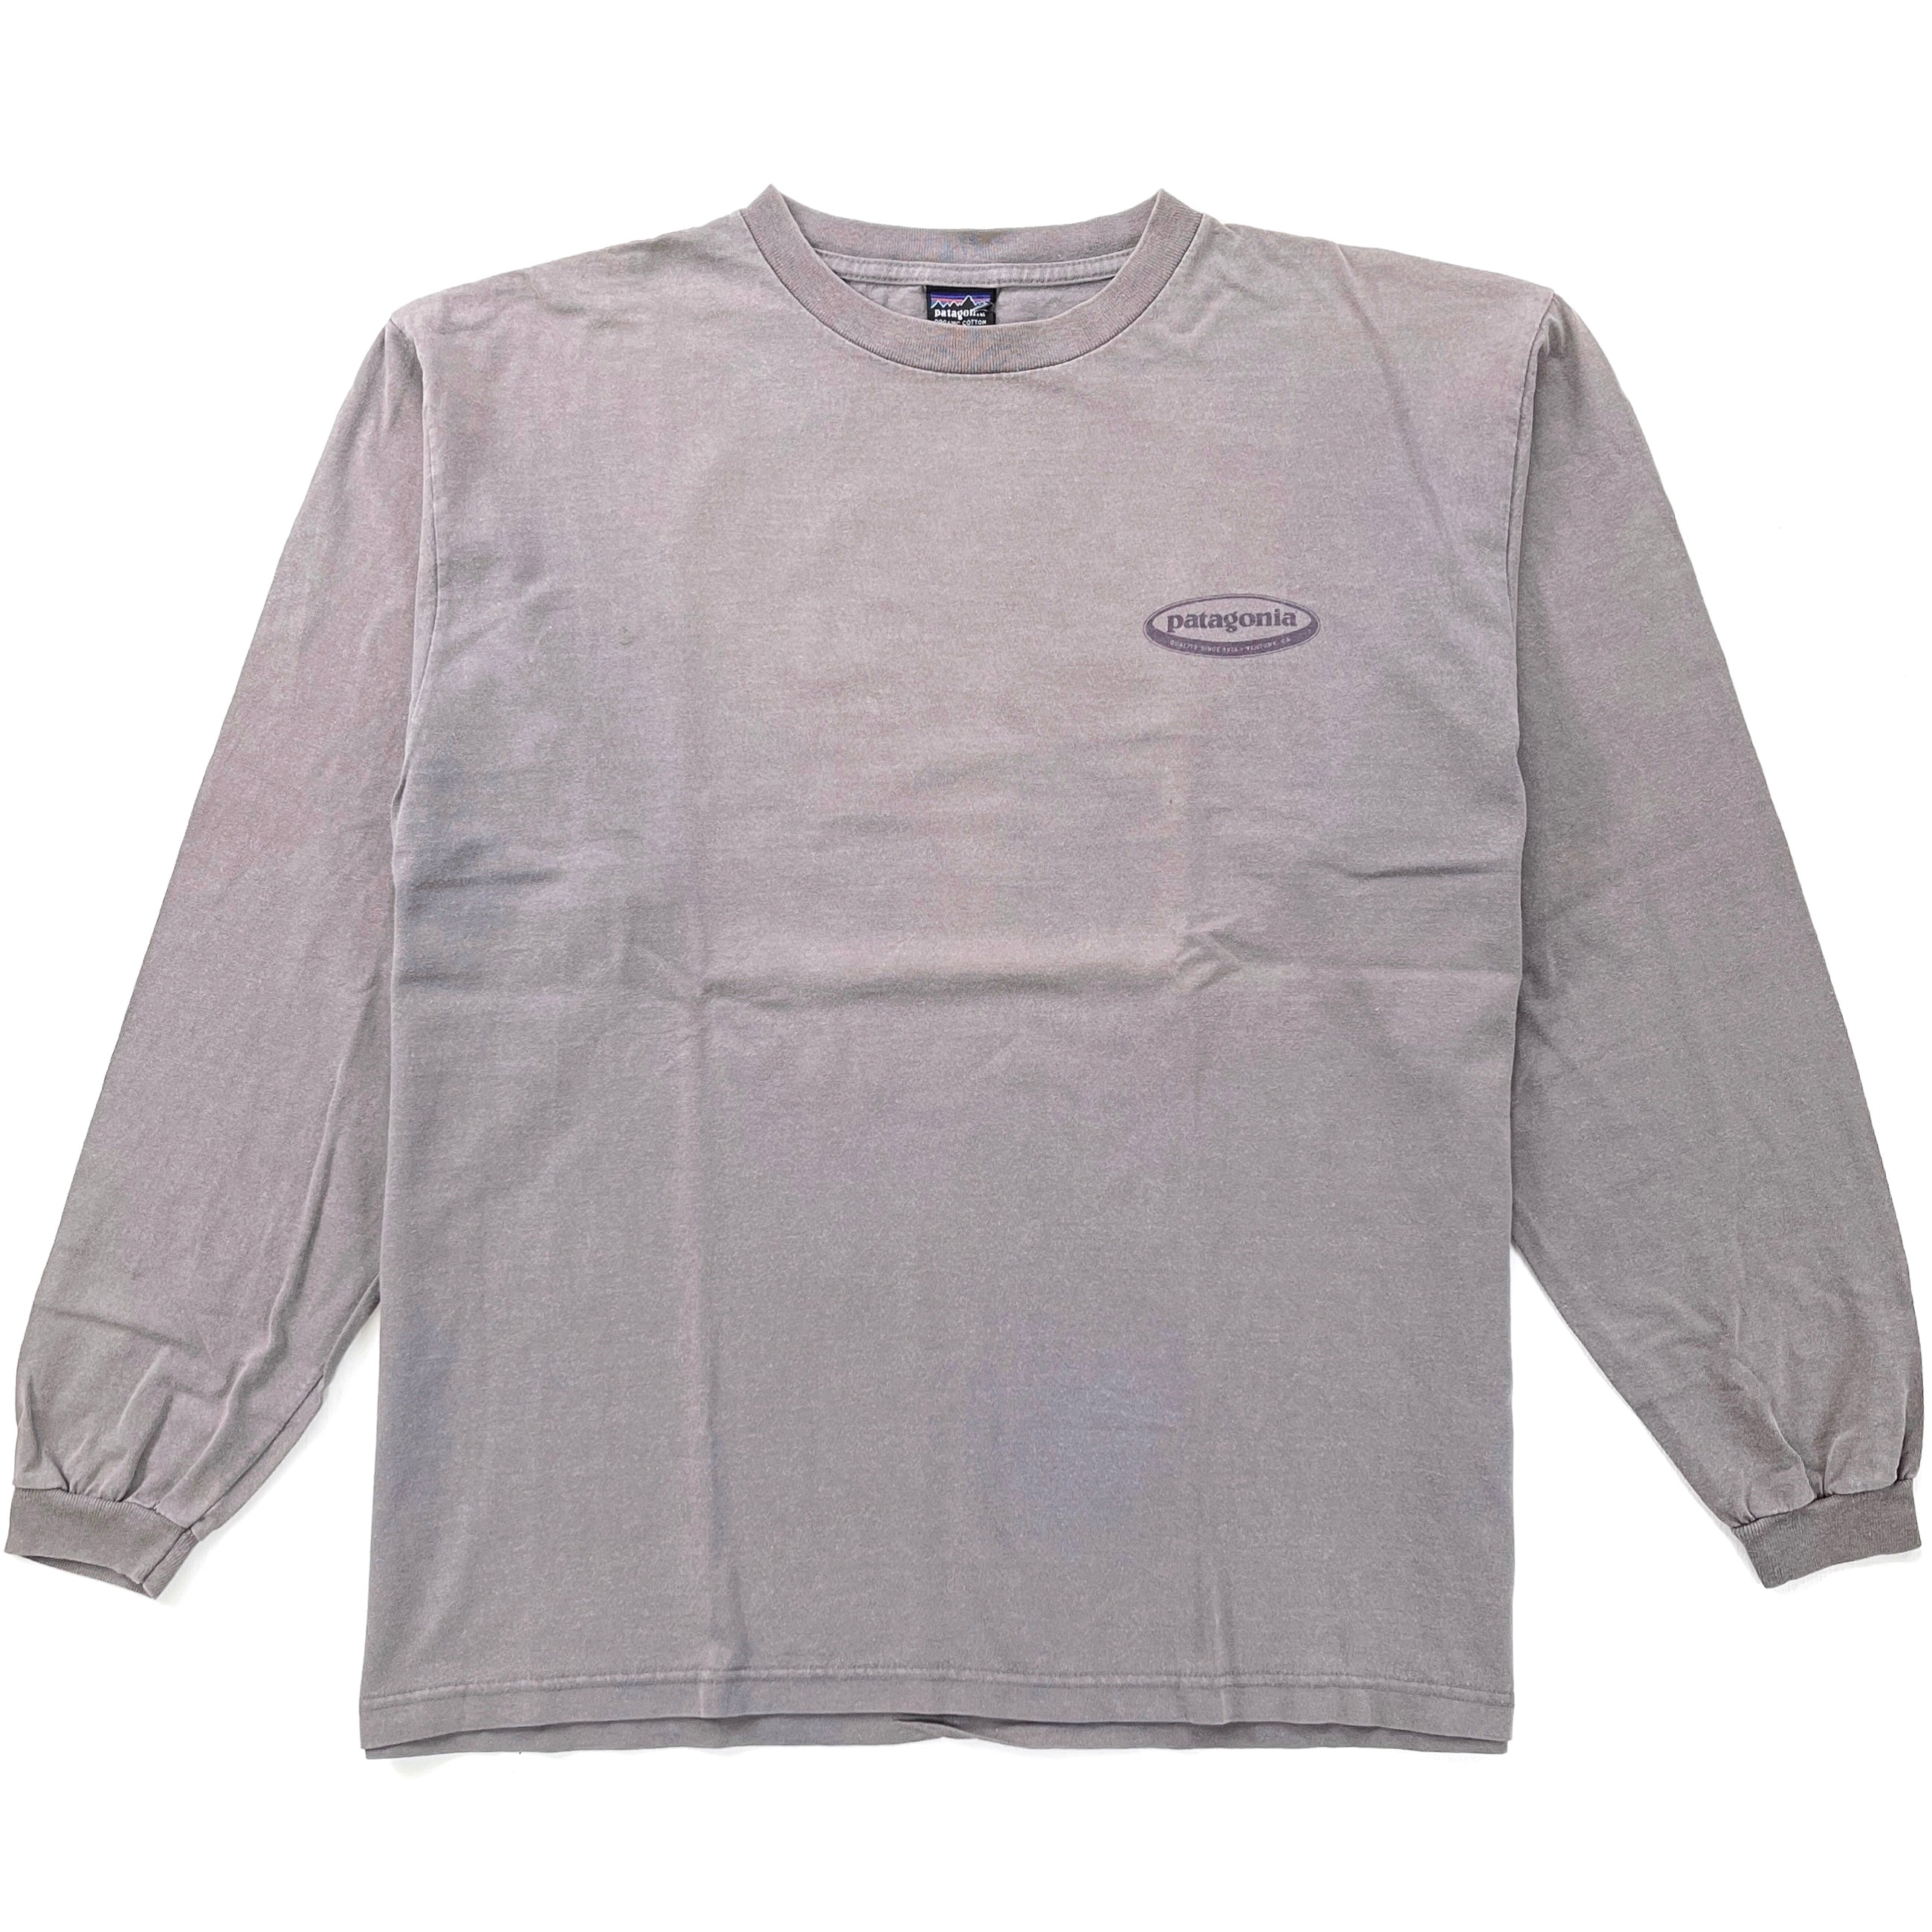 1990s Patagonia Made In The U.S.A. Organic Cotton T-Shirt, Purple (L)